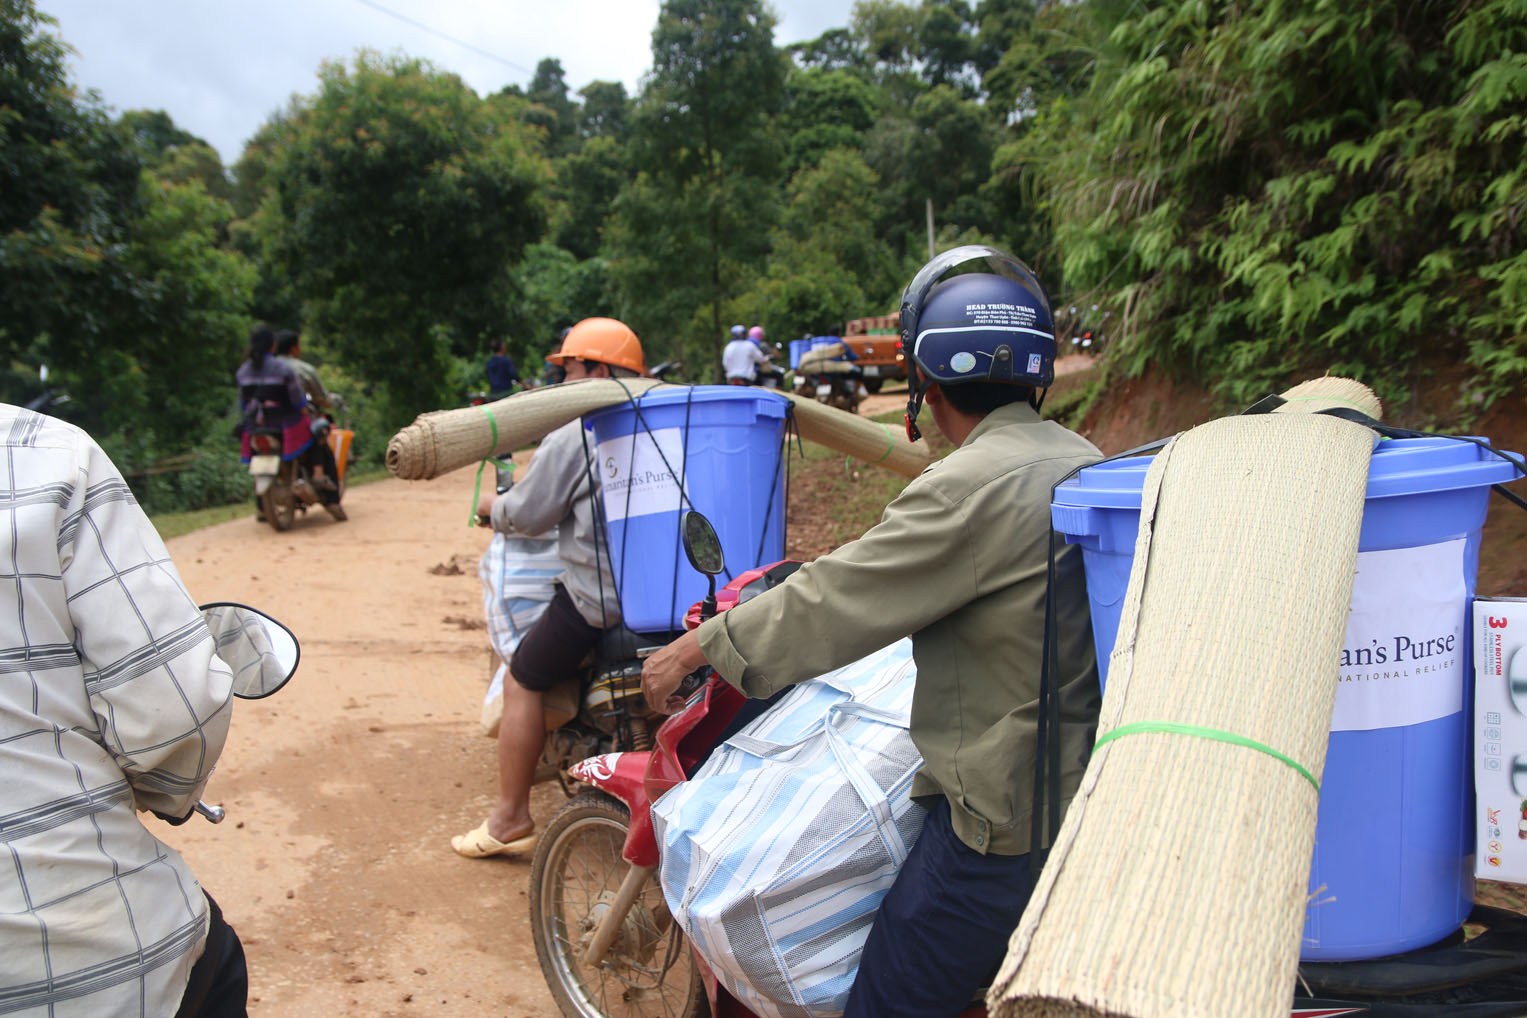 Relief supplies are delivered by motorbike to homes in the region.